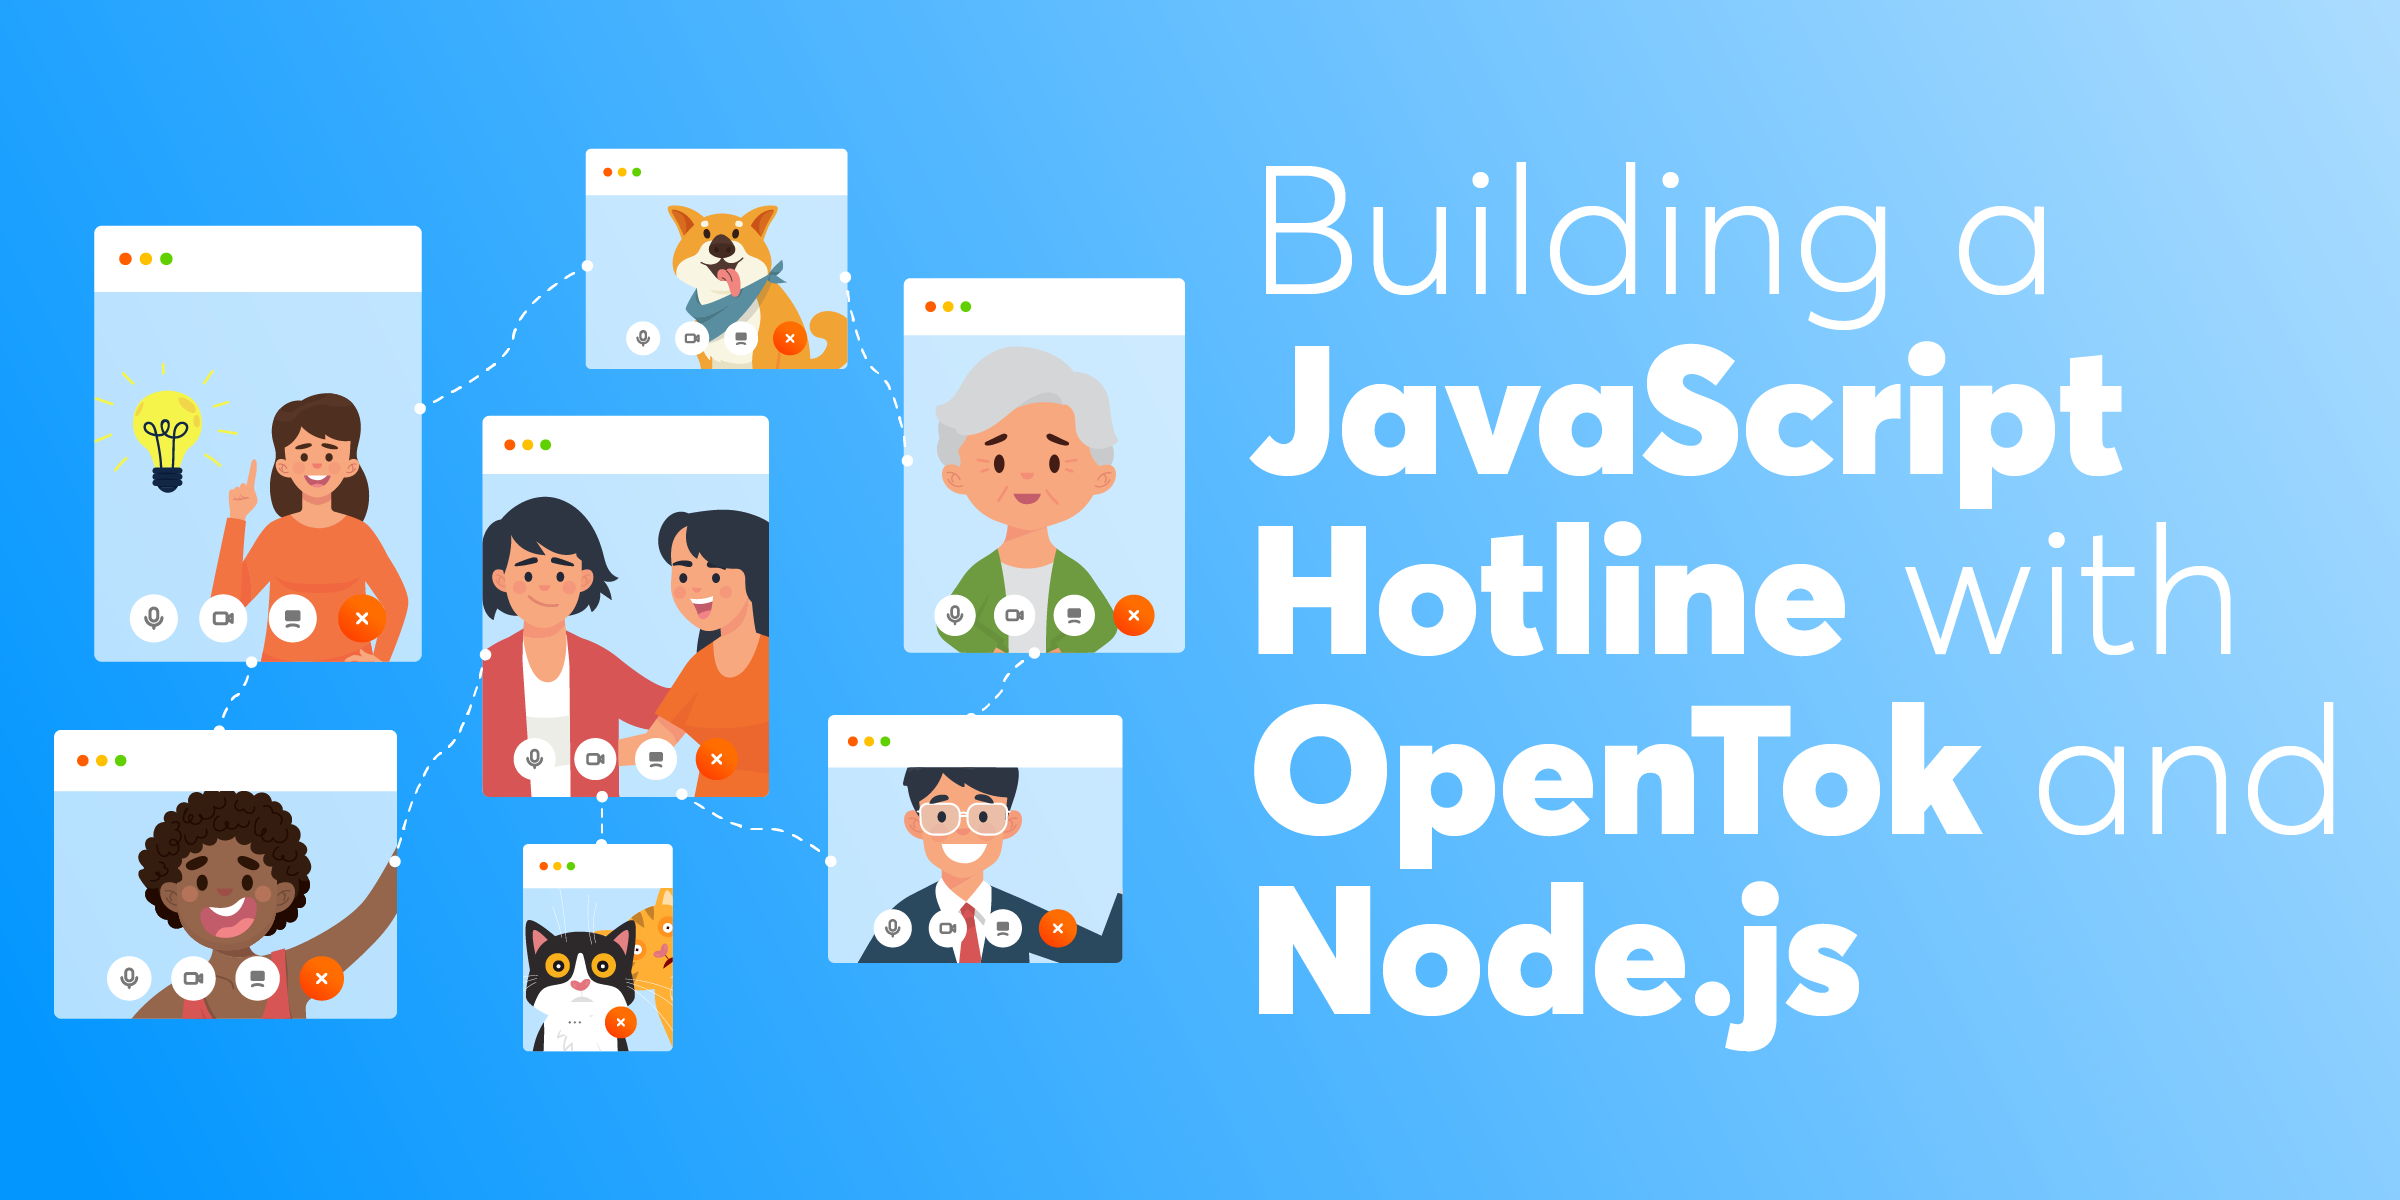 Building a JavaScript Hotline with OpenTok and Node.js